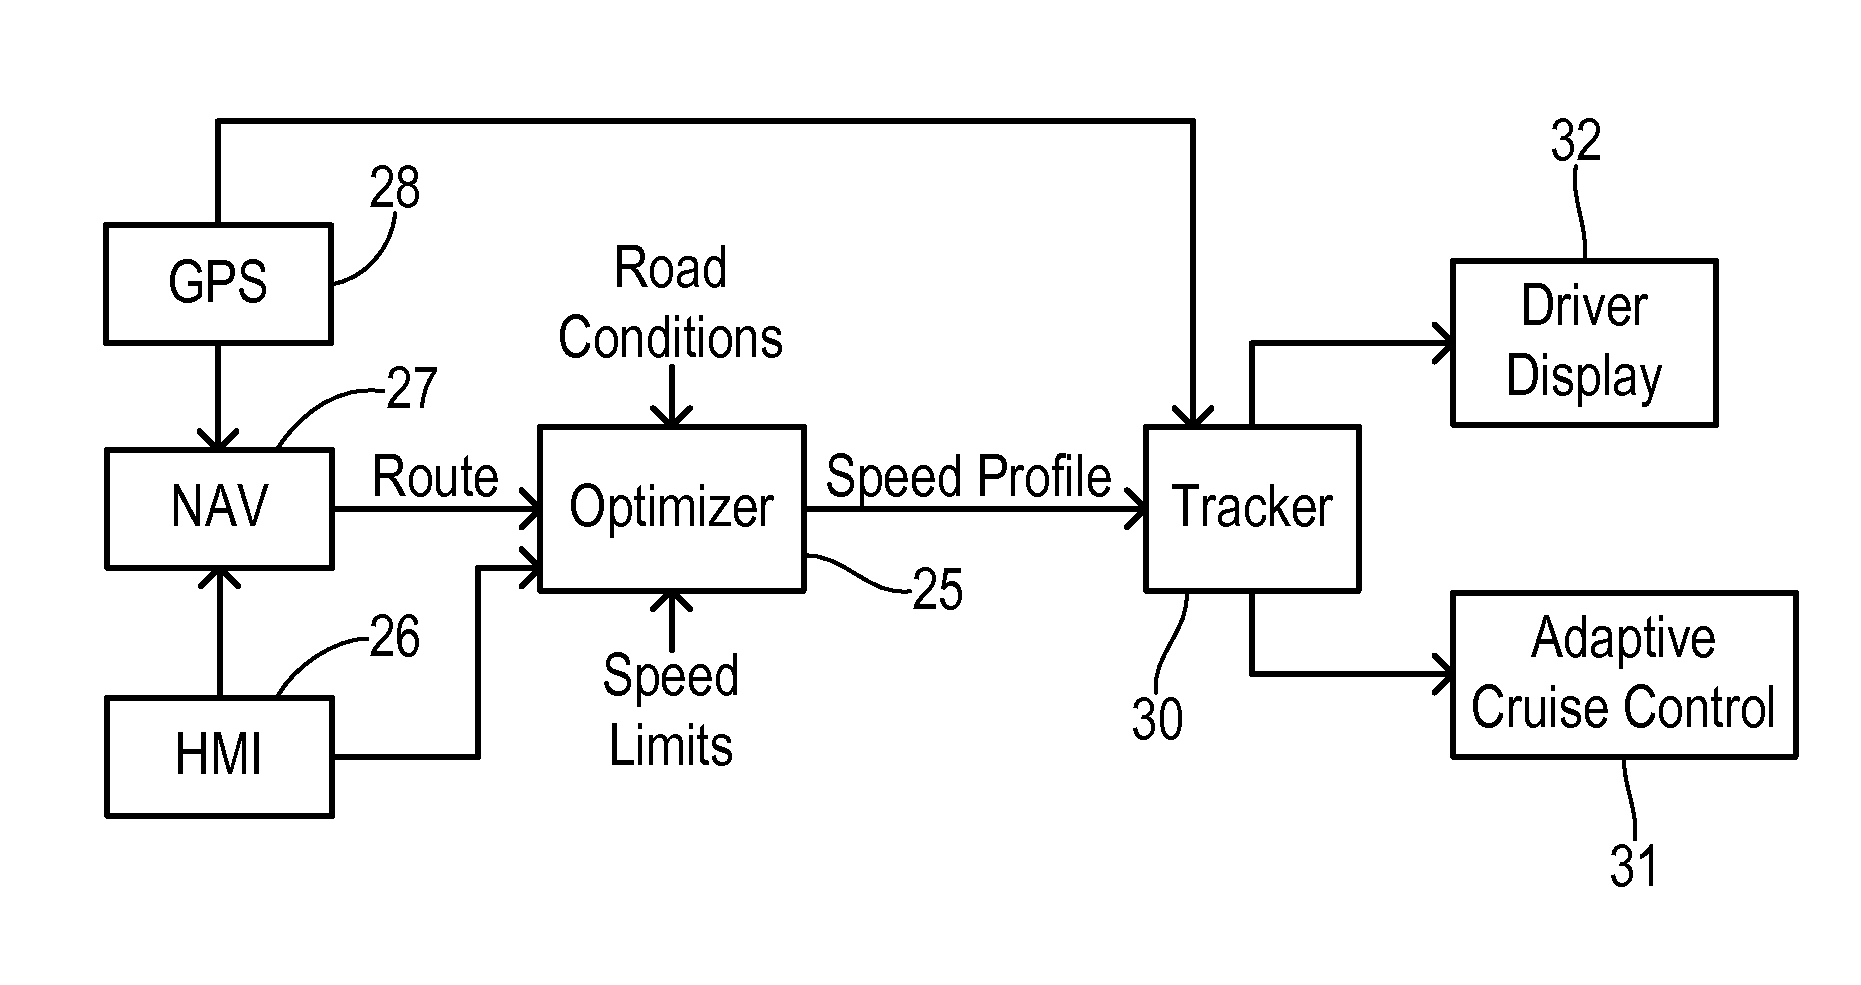 Route navigation with optimal speed profile